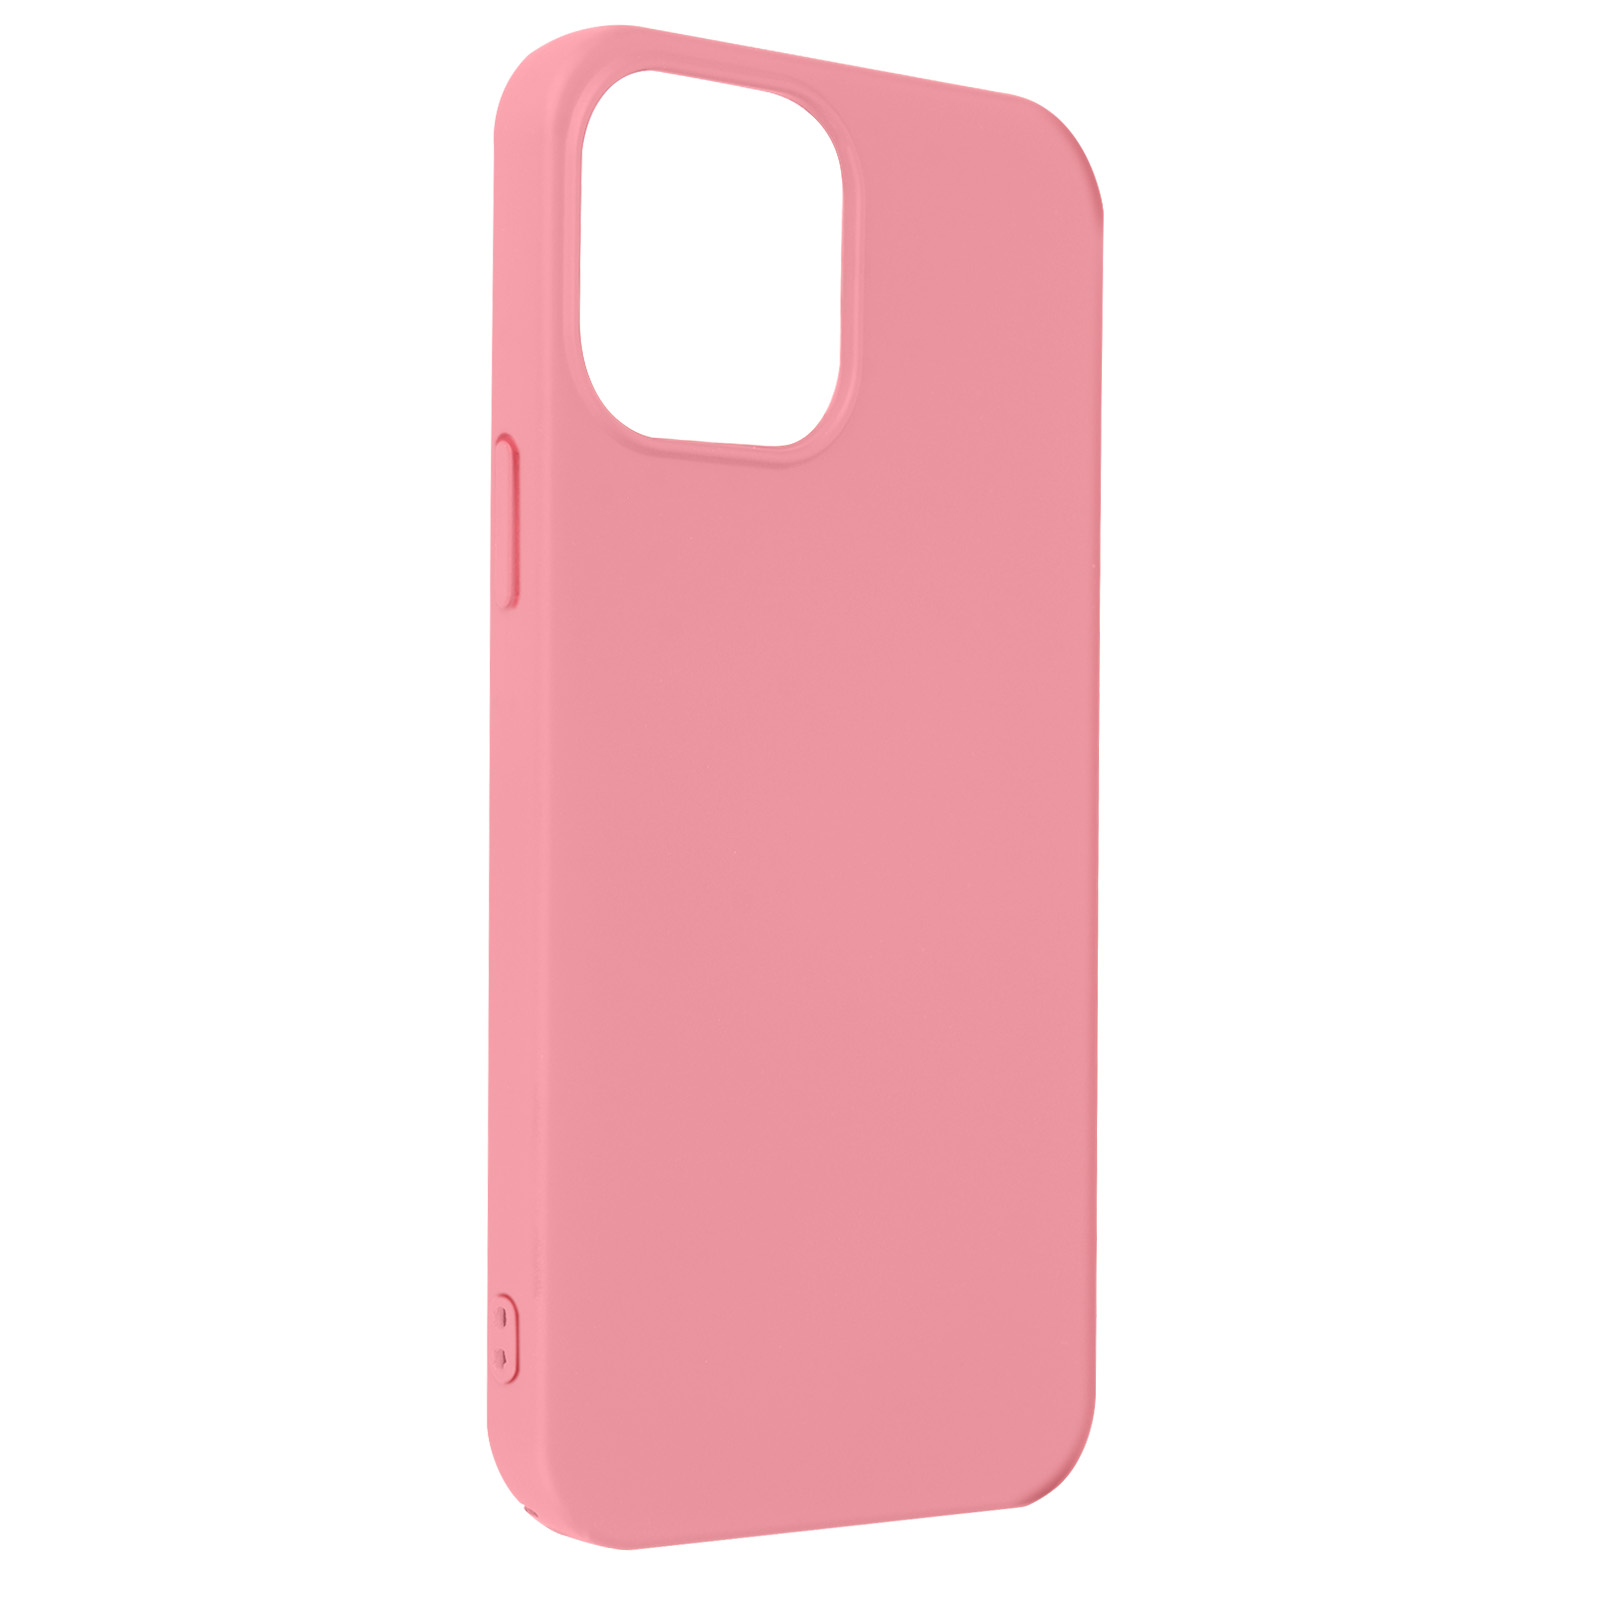 Fast Pro Rosa Max, 13 AVIZAR Series, Apple, iPhone Backcover,